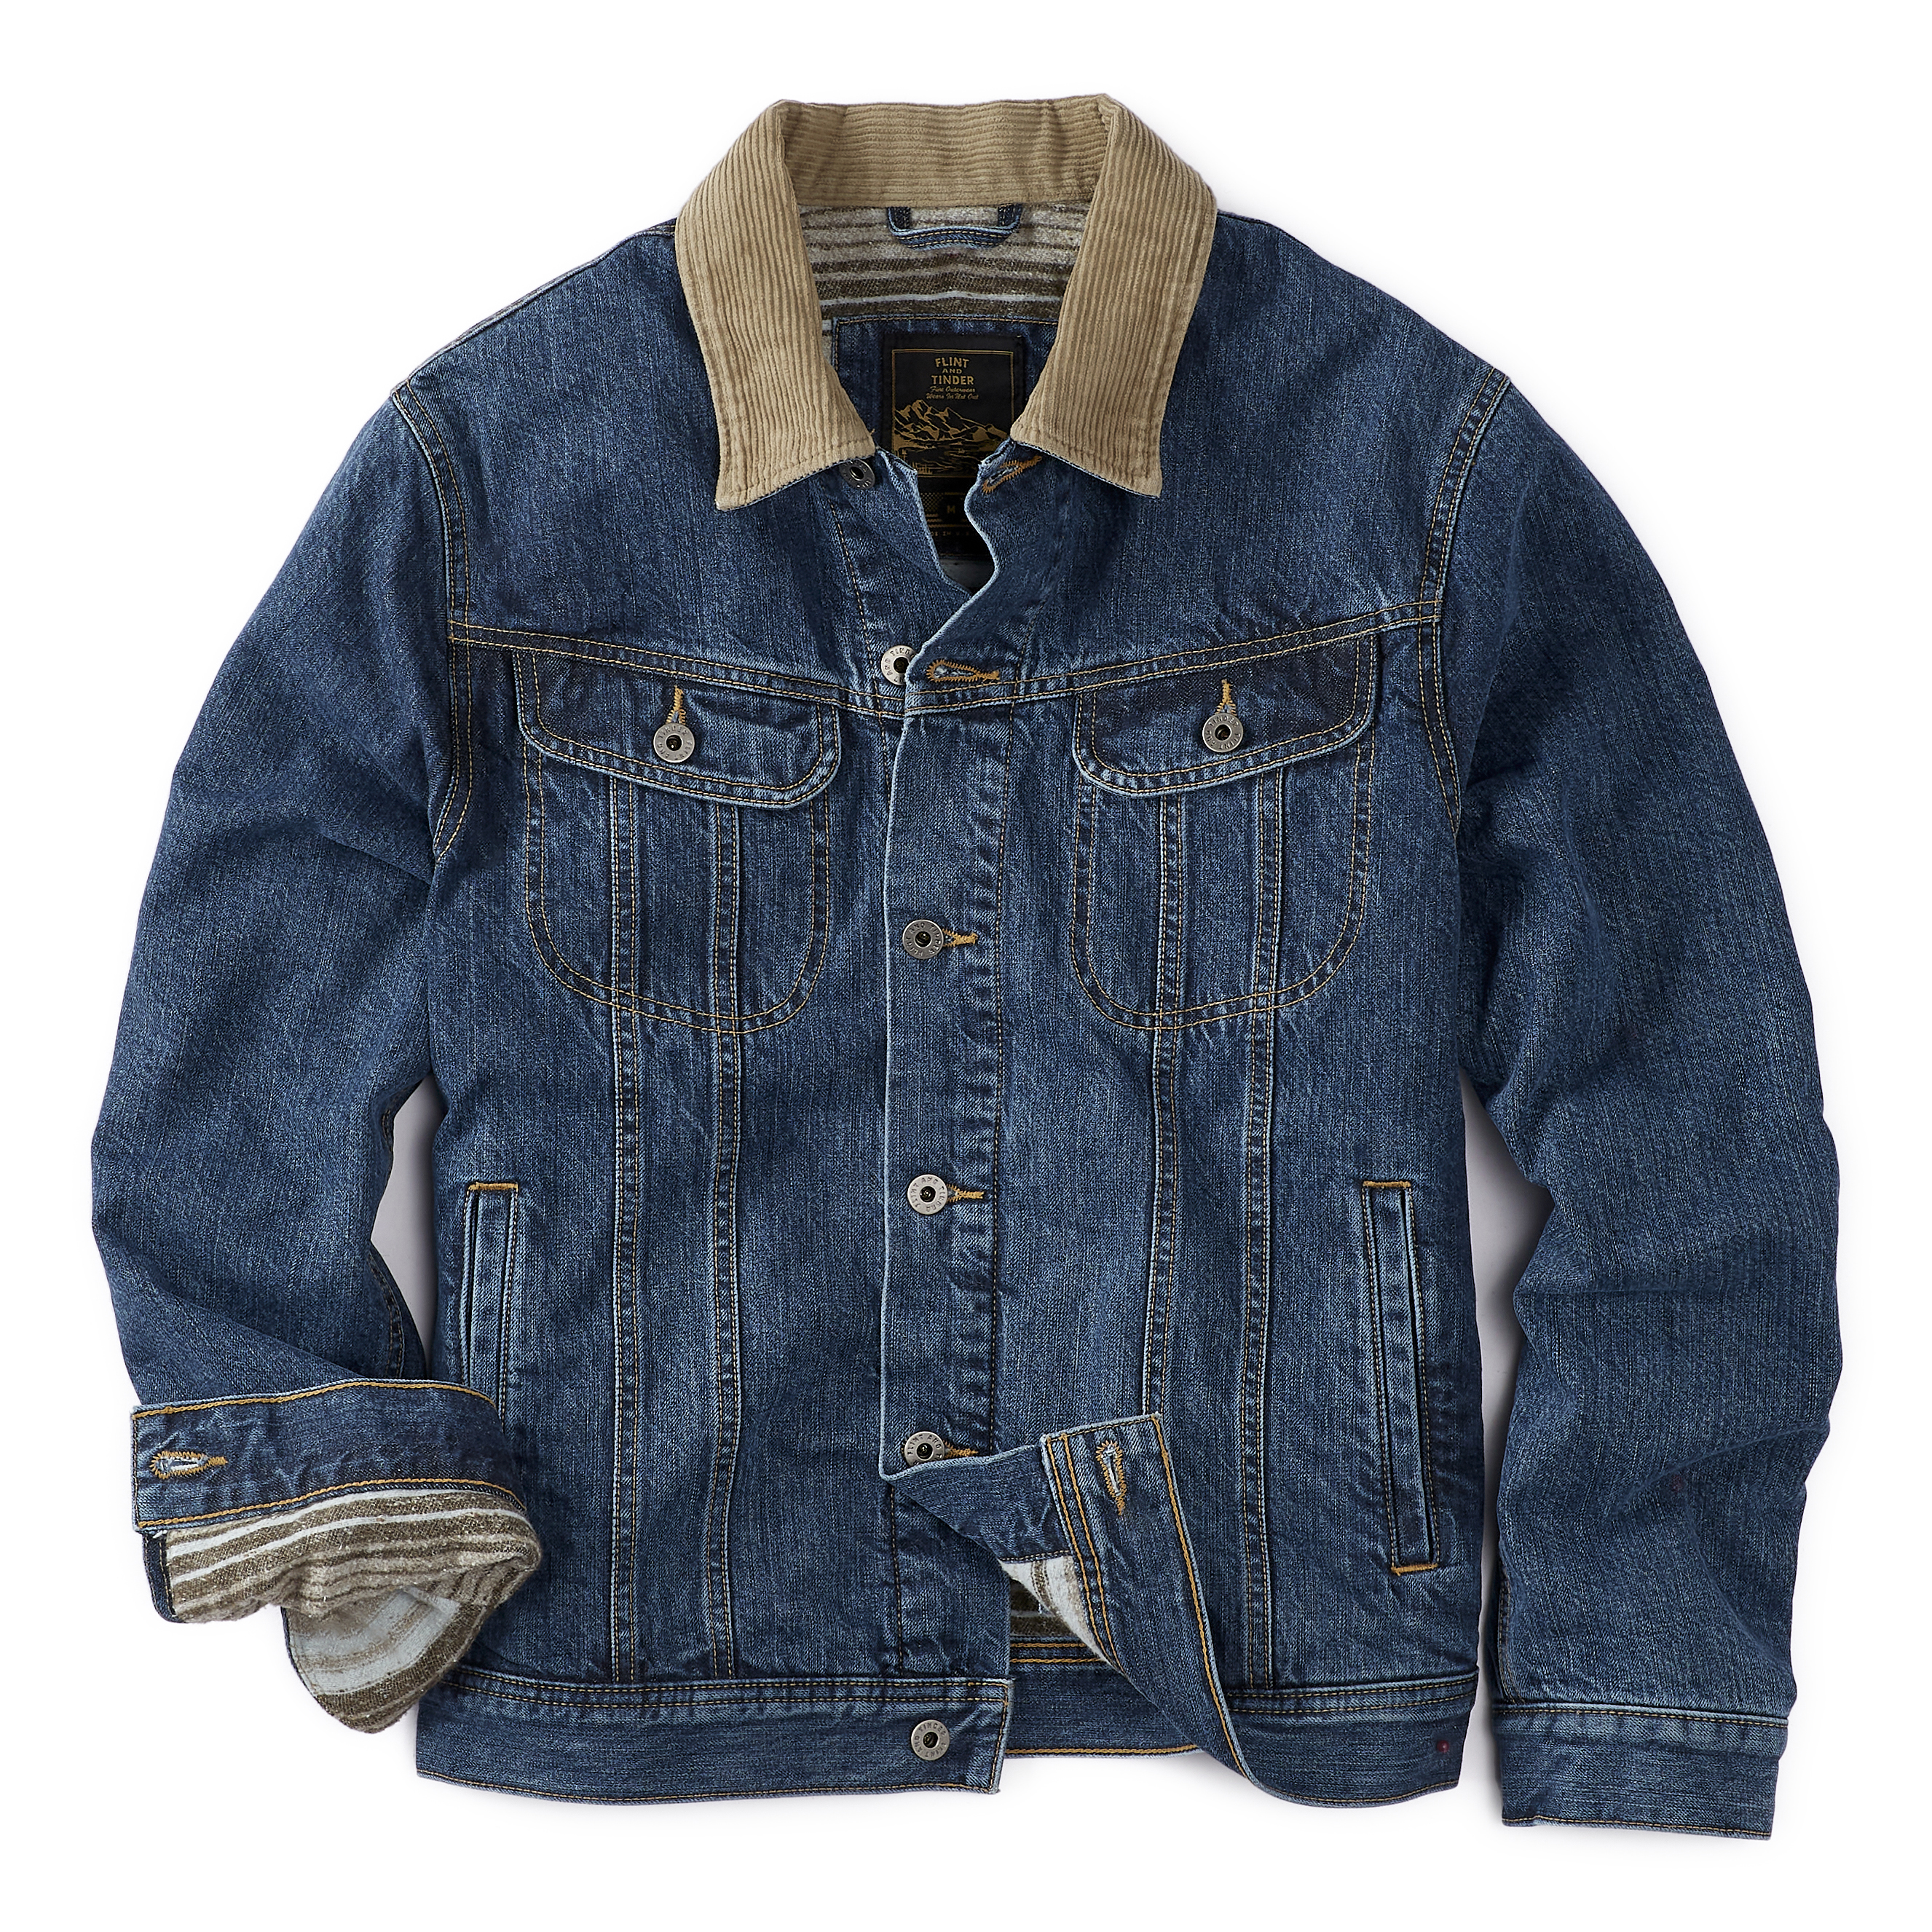 LBECLEY Flannel Jacket Women Women Autumn and Winter Washed Ripped Denim  Jacket Loose Pocket Denim Jacket Faded Denim Jacket for Women Blue L -  Walmart.com